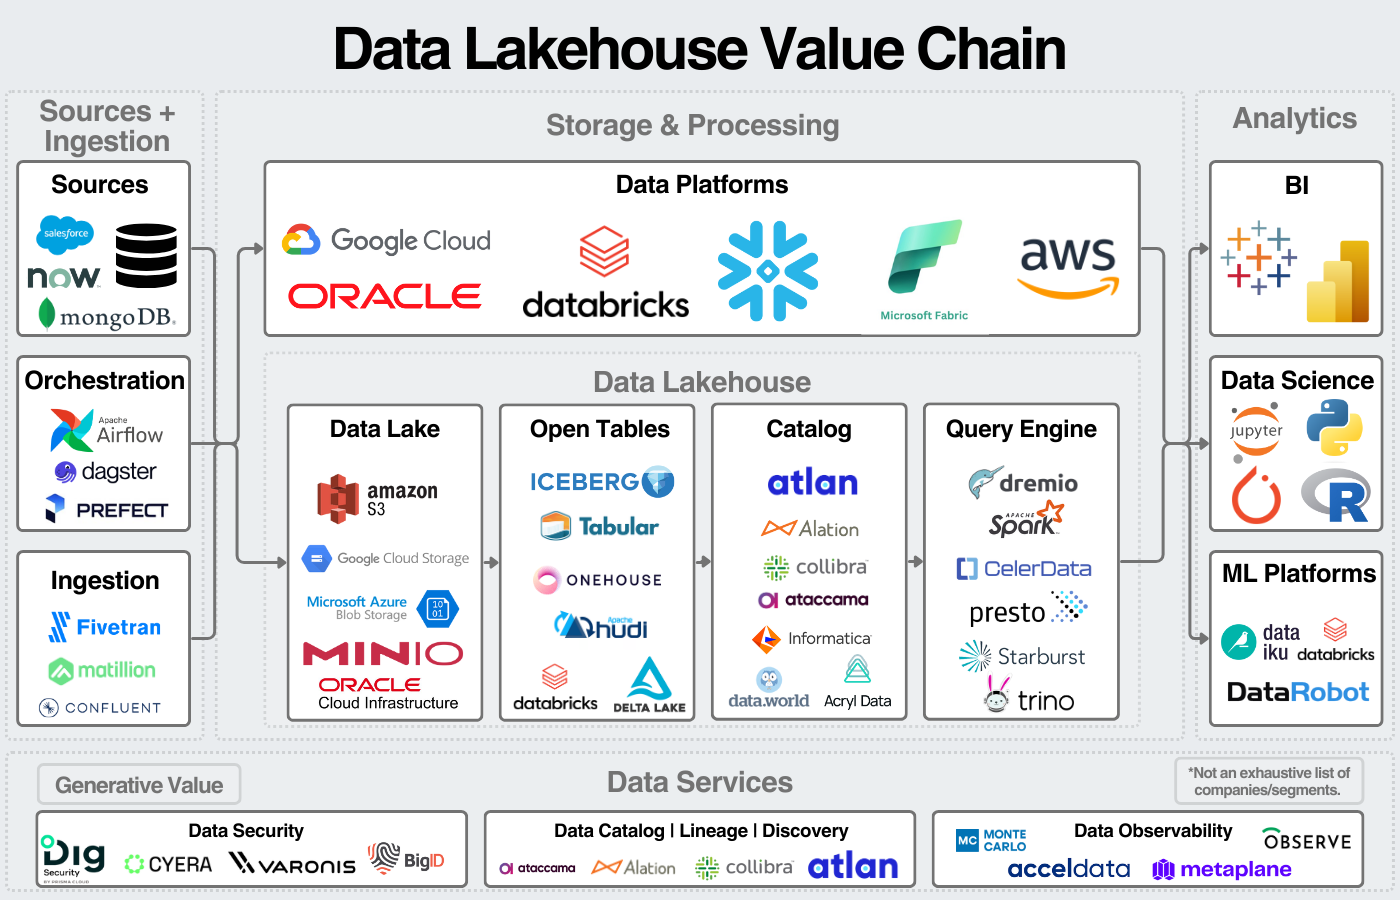 A Primer on the Data Lakehouse